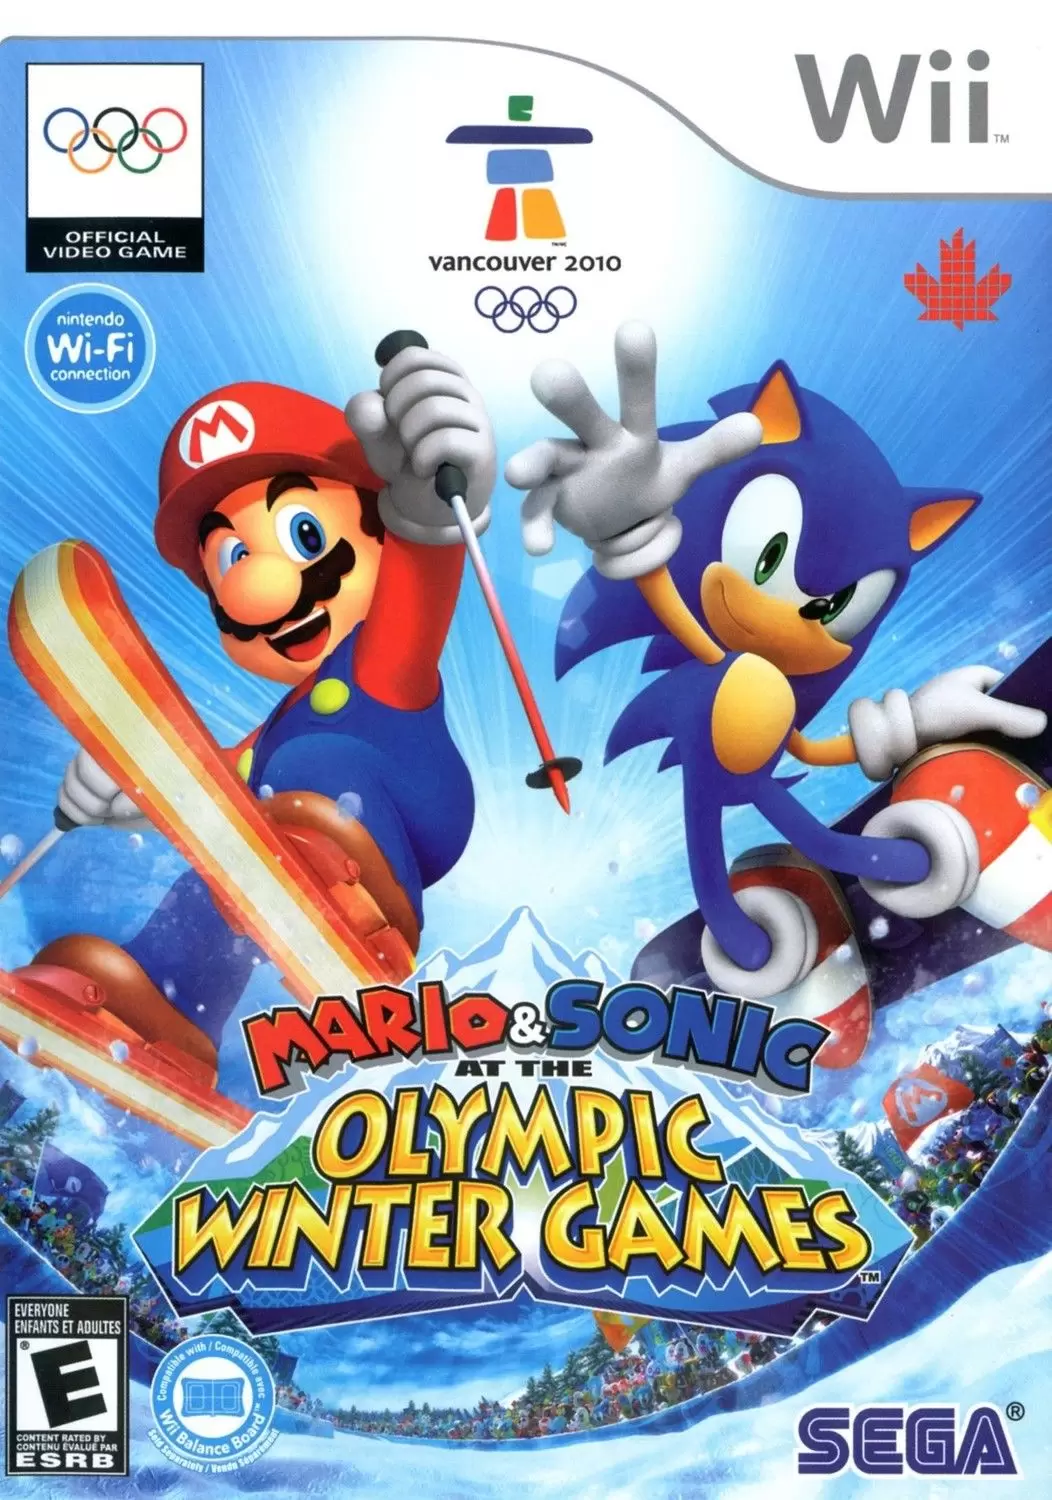 Nintendo Wii Games - Mario & Sonic at the Olympic Winter Games